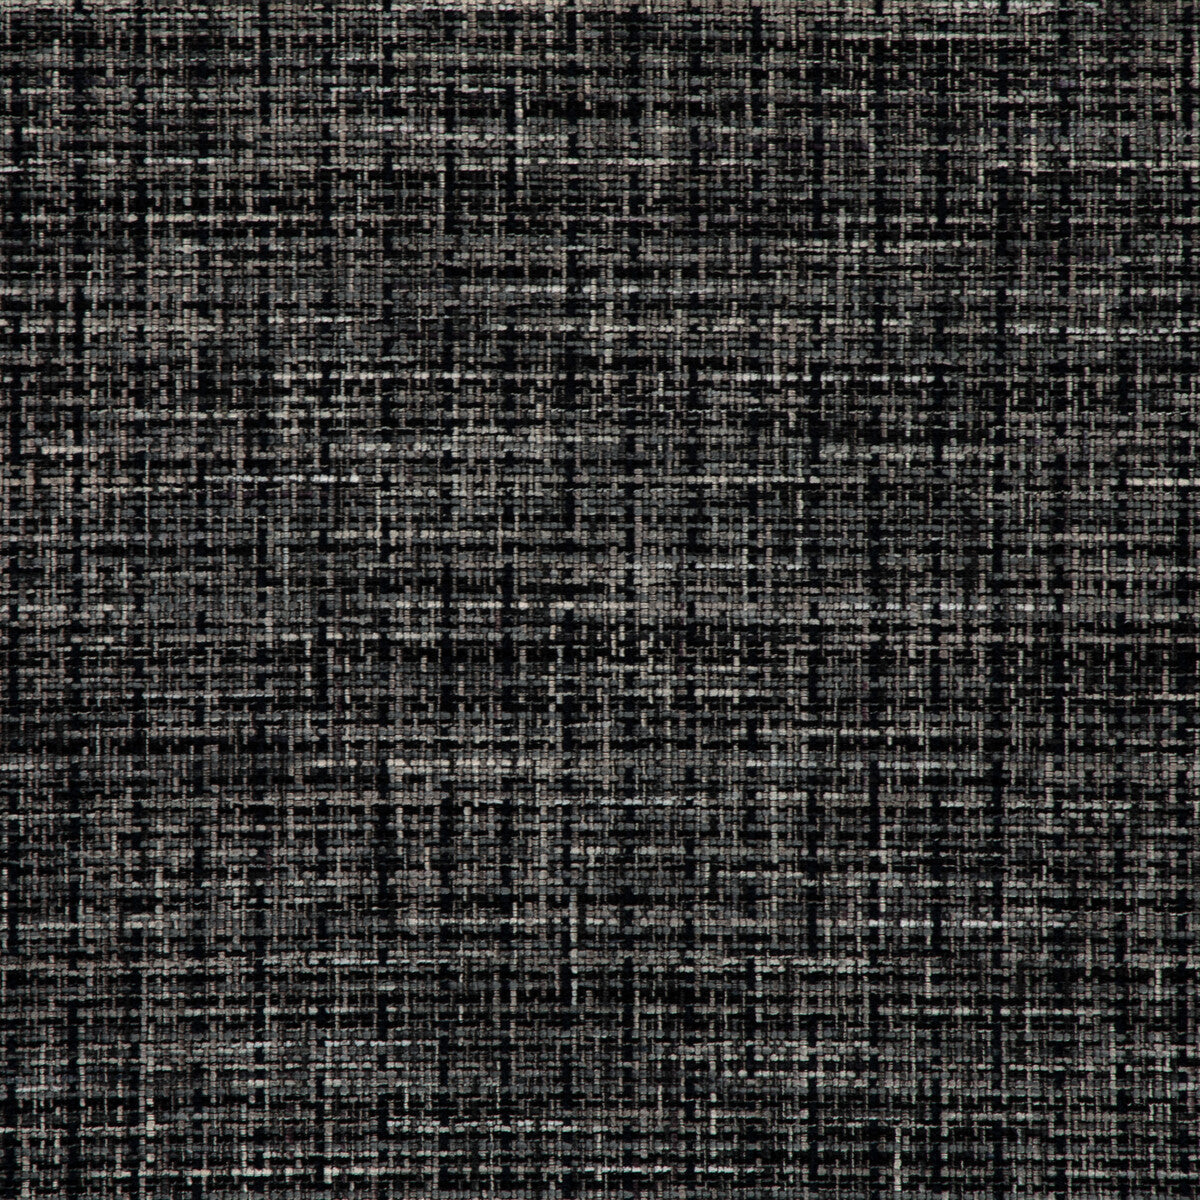 Kravet Design fabric in 37201-811 color - pattern 37201.811.0 - by Kravet Design in the Woven Colors collection